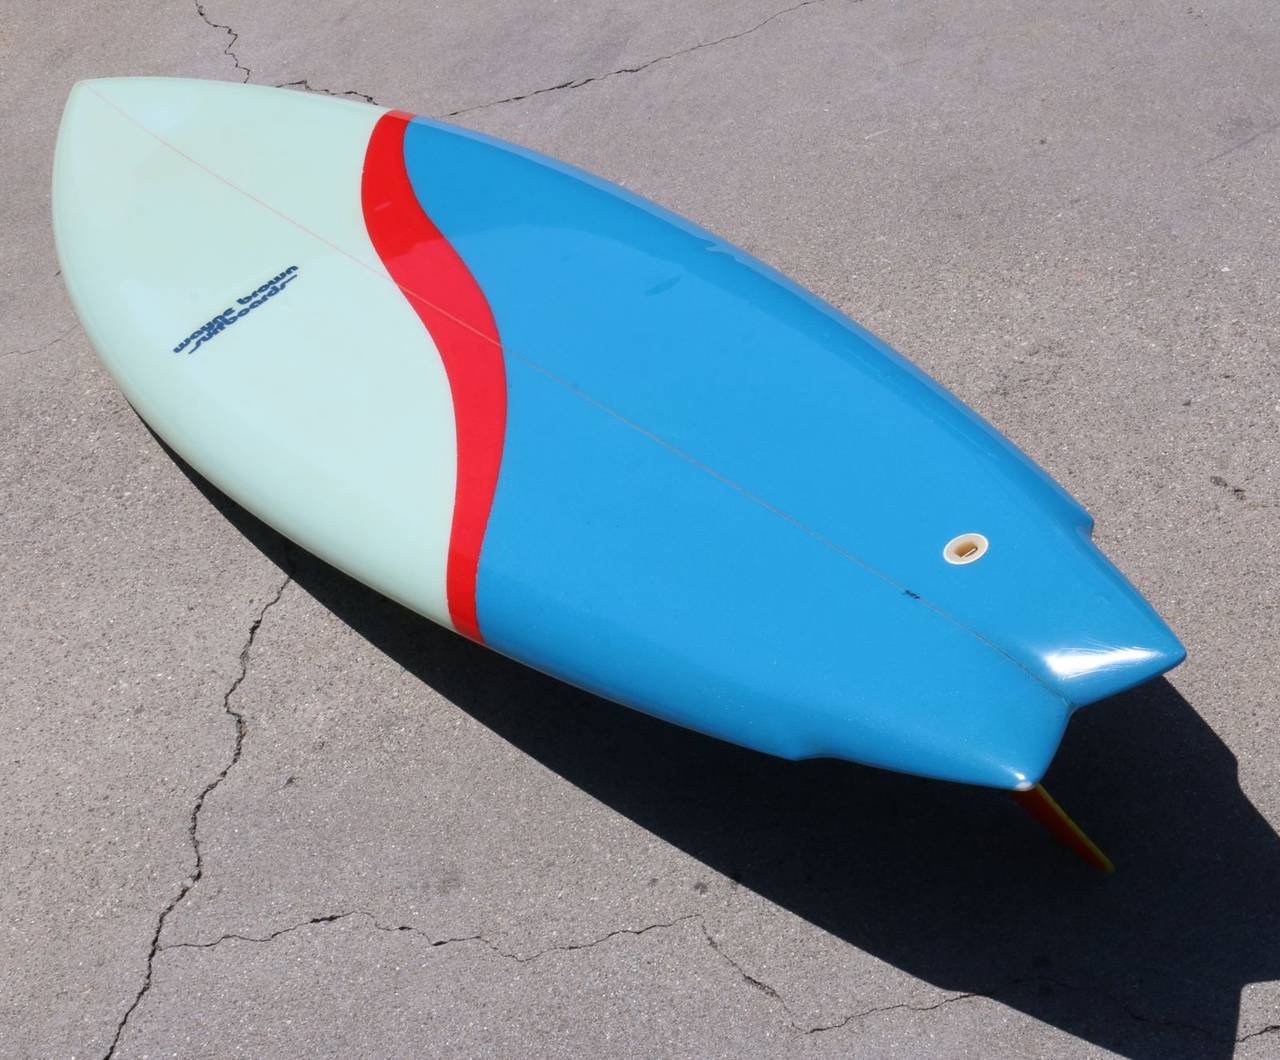 The energetic shape of this stunning surf board is made even more visually exciting by the maker's vibrant use of color. Bright royal blue and subtle sea foam green are accented by a cherry red band cascading across the board.

At 6 foot, 6 inches